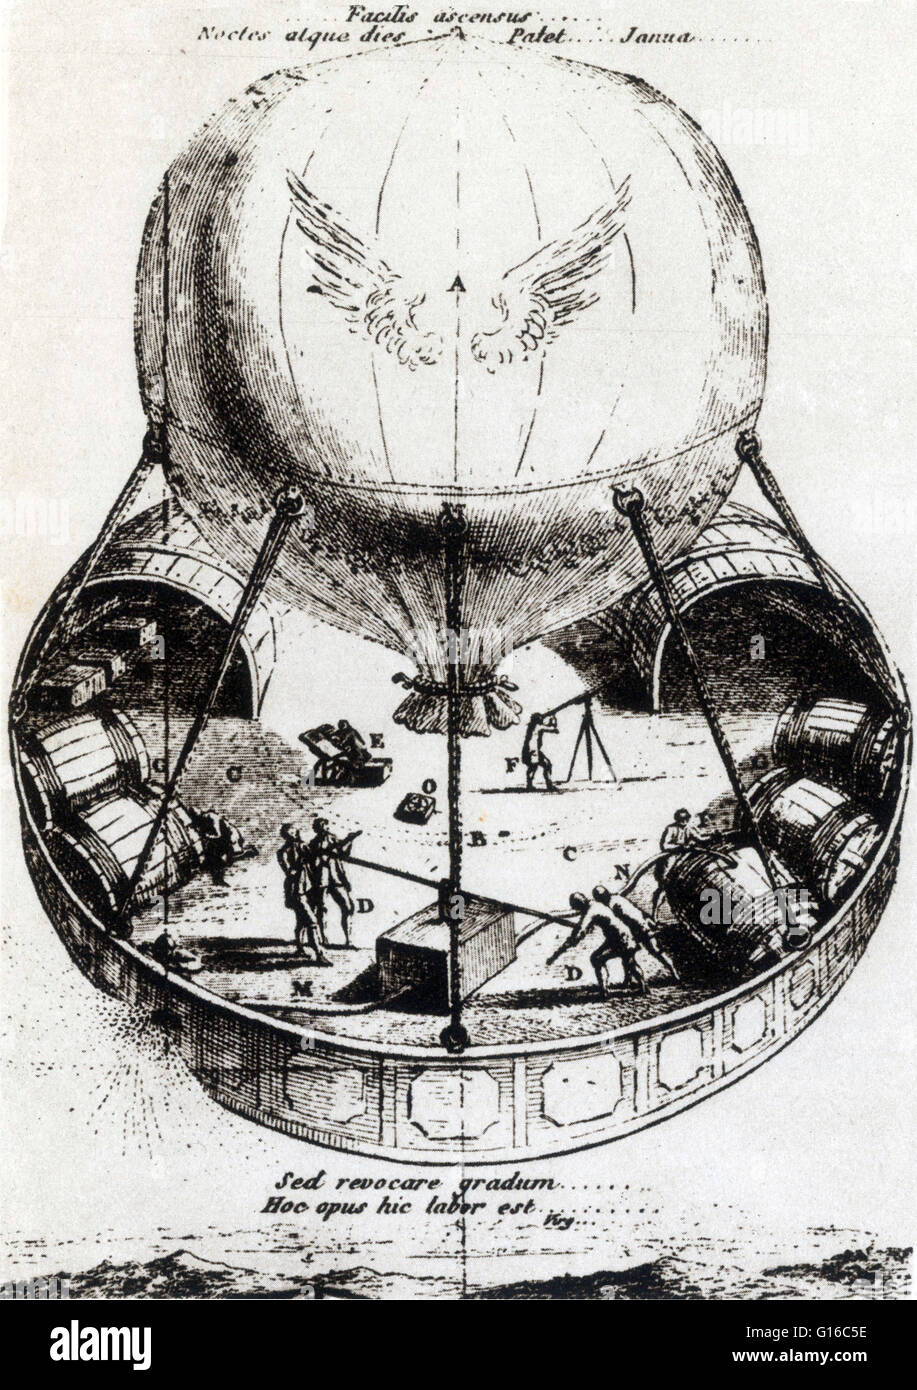 A project of a 'Voyage to Other Spheres' fostered by M. de Saint-Just. It is a huge ship with astronomical instruments for studying the solar system. The future and the concept of eternity have been major subjects of philosophy, religion, and science, and Stock Photo